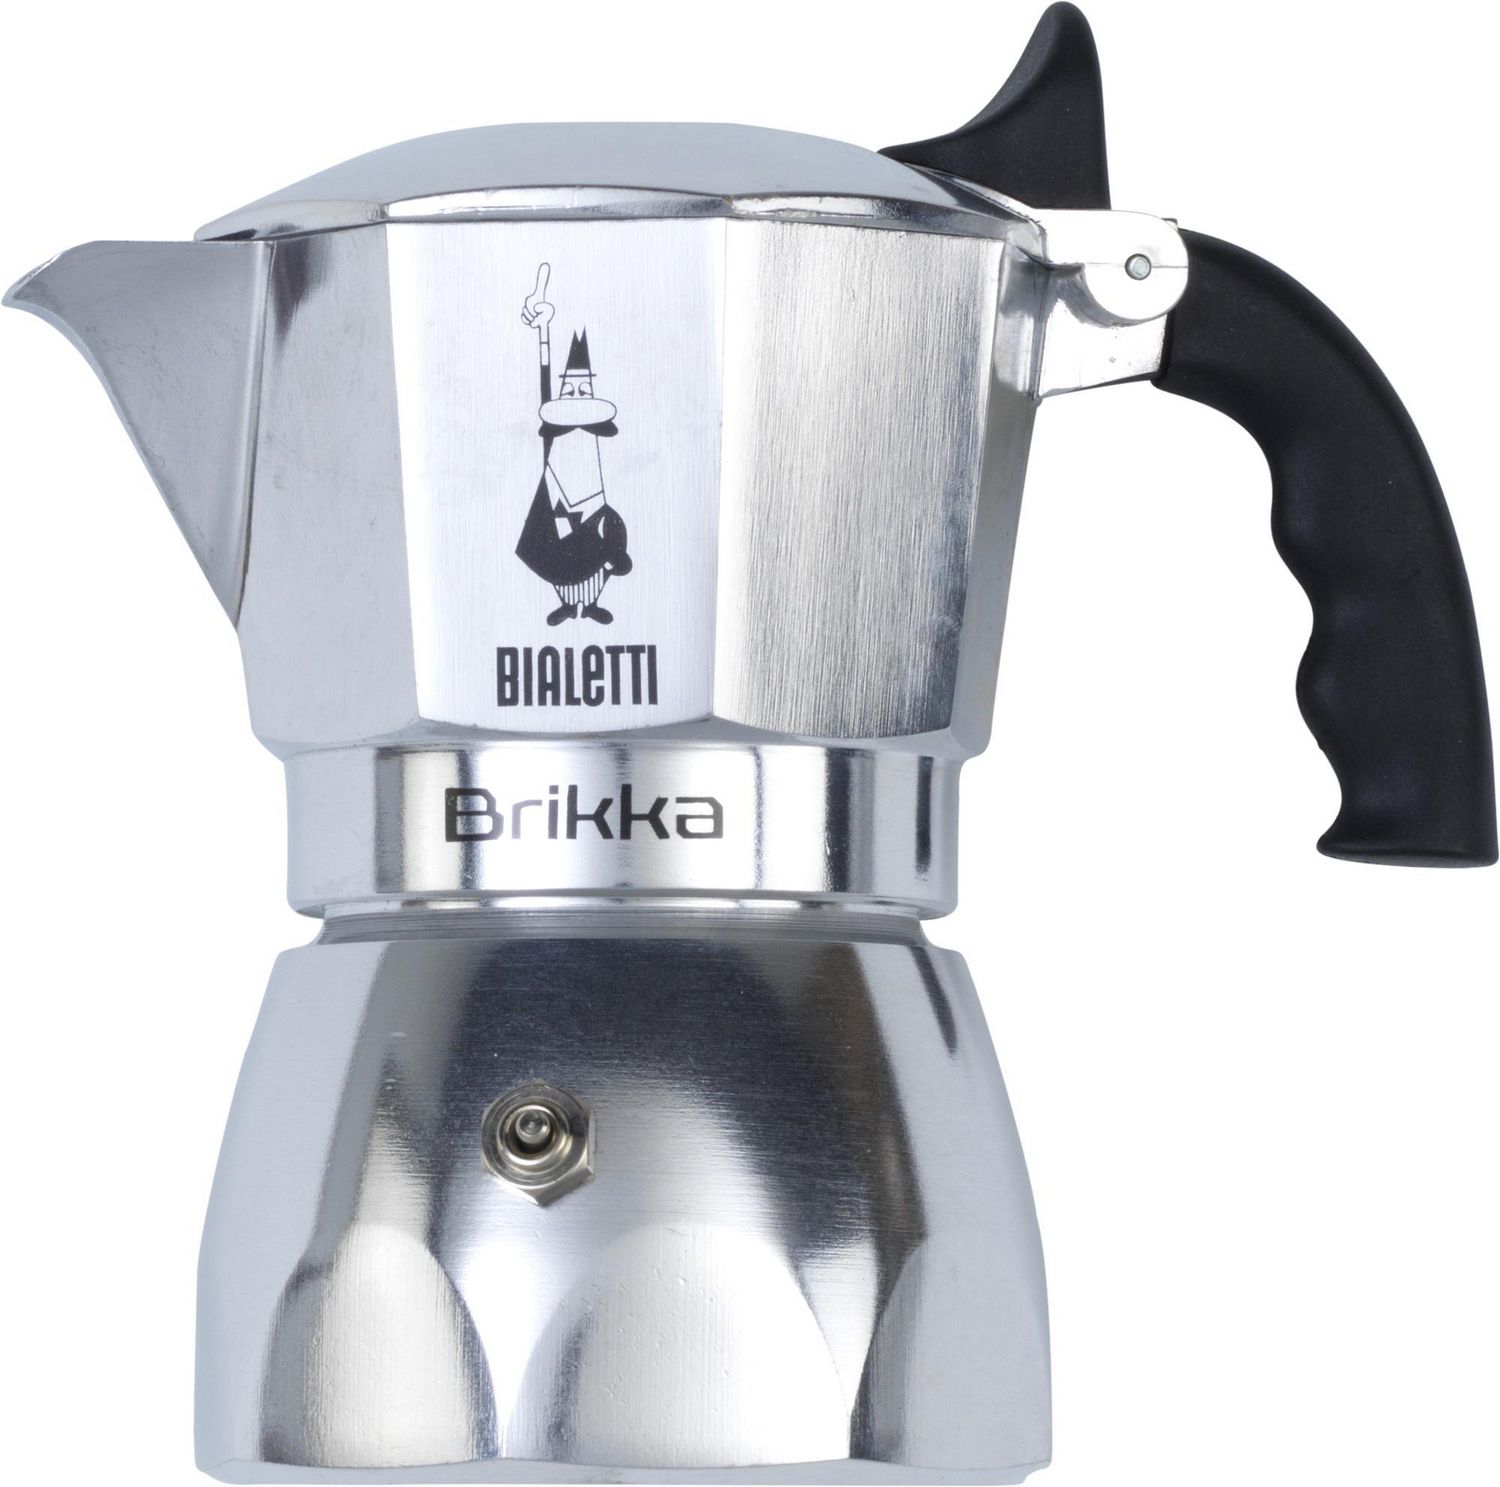 bialetti brikka induction - cafetiere bialetti induction